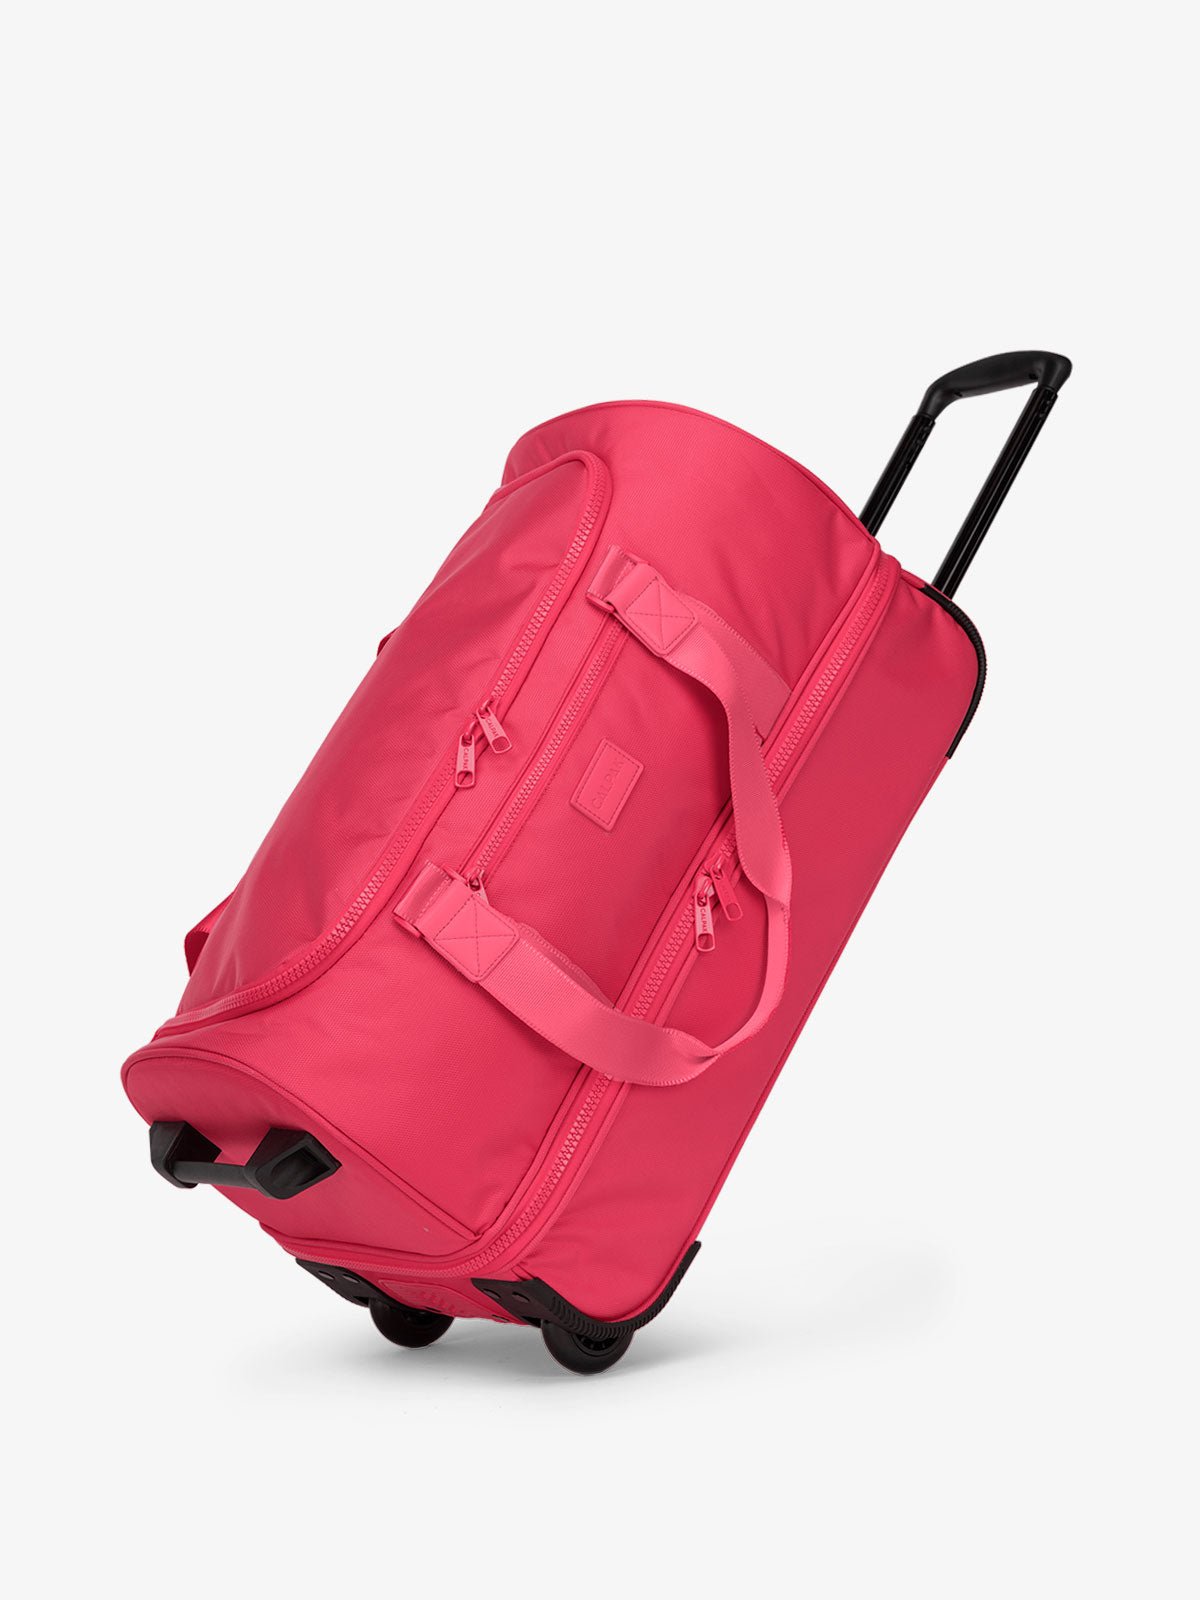 CALPAK Stevyn Rolling Duffel side view with top handle extended in hot pink dragonfruit